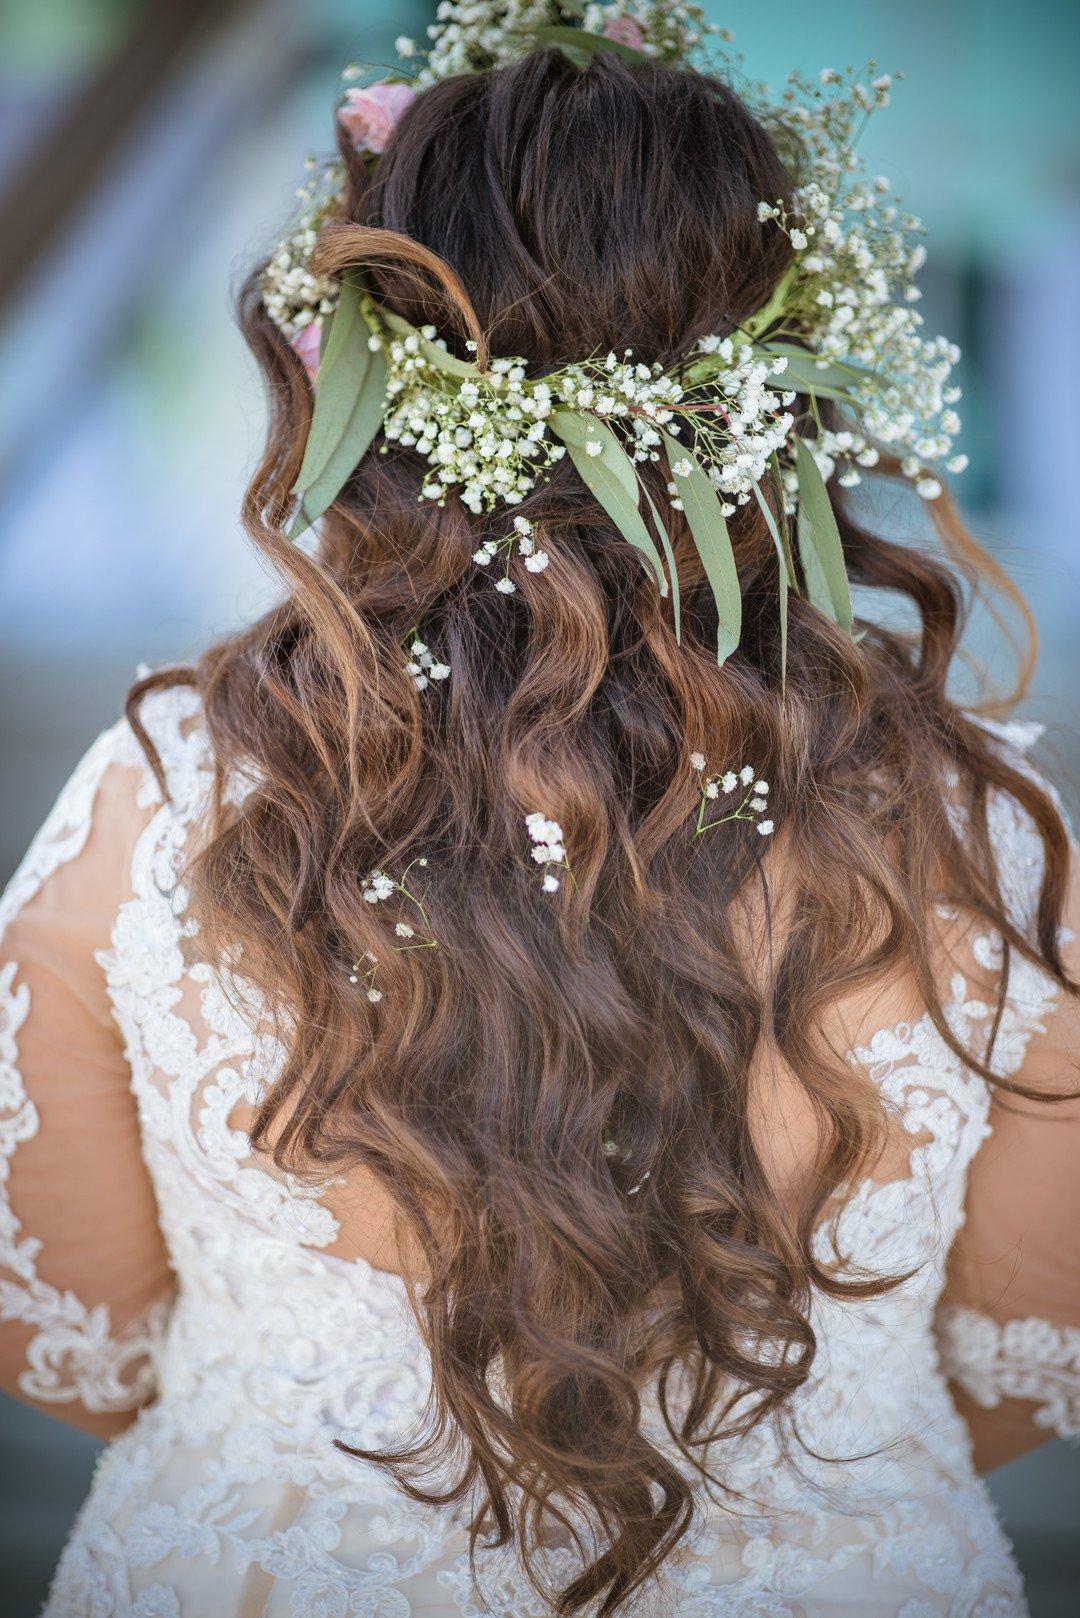 40 Wedding Hairstyles for Long Hair: Bridal Updos, Veils & More